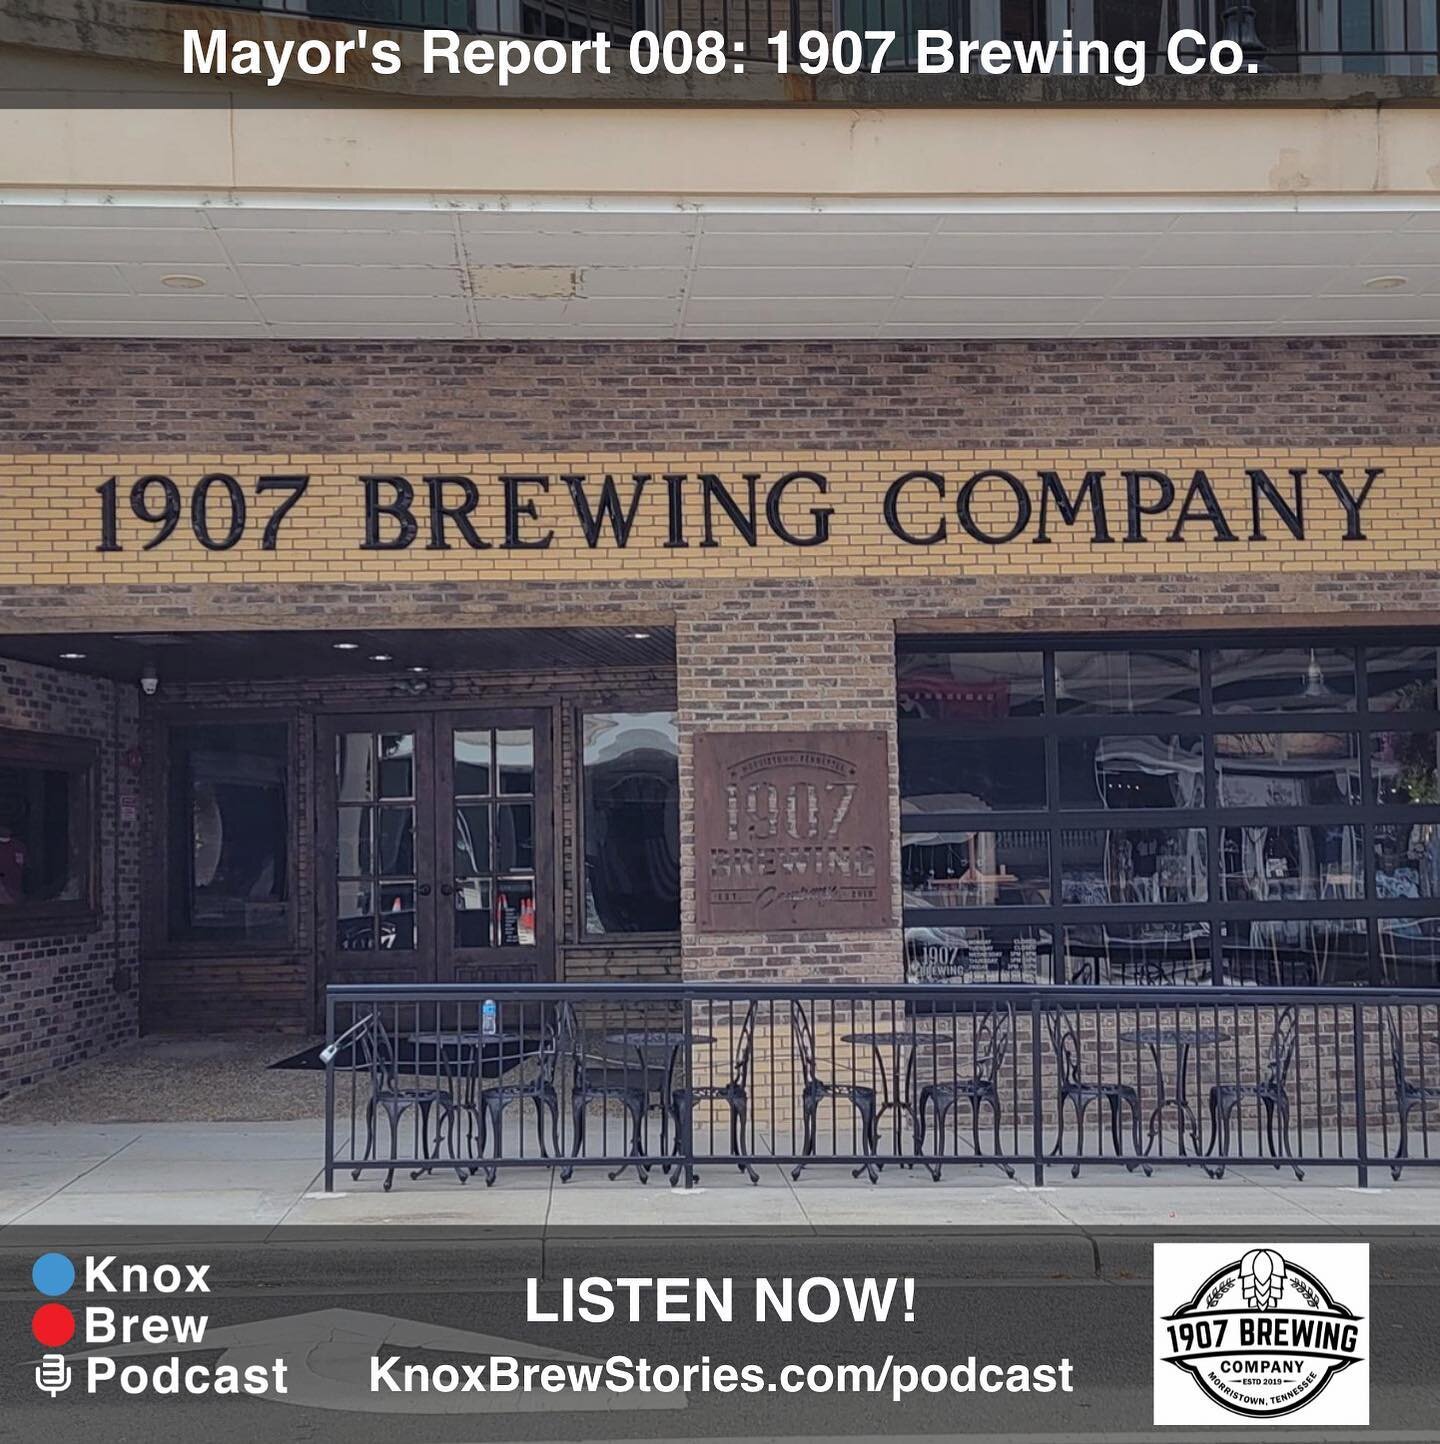 The Mayor went to Morristown! On this episode of the Mayor&rsquo;s Report, field correspondent Greg Headrick met with the General Manager of 1907 Brewing Company, Haley Fugate, about the origin of the brewery &amp; its beer names, as well as the futu